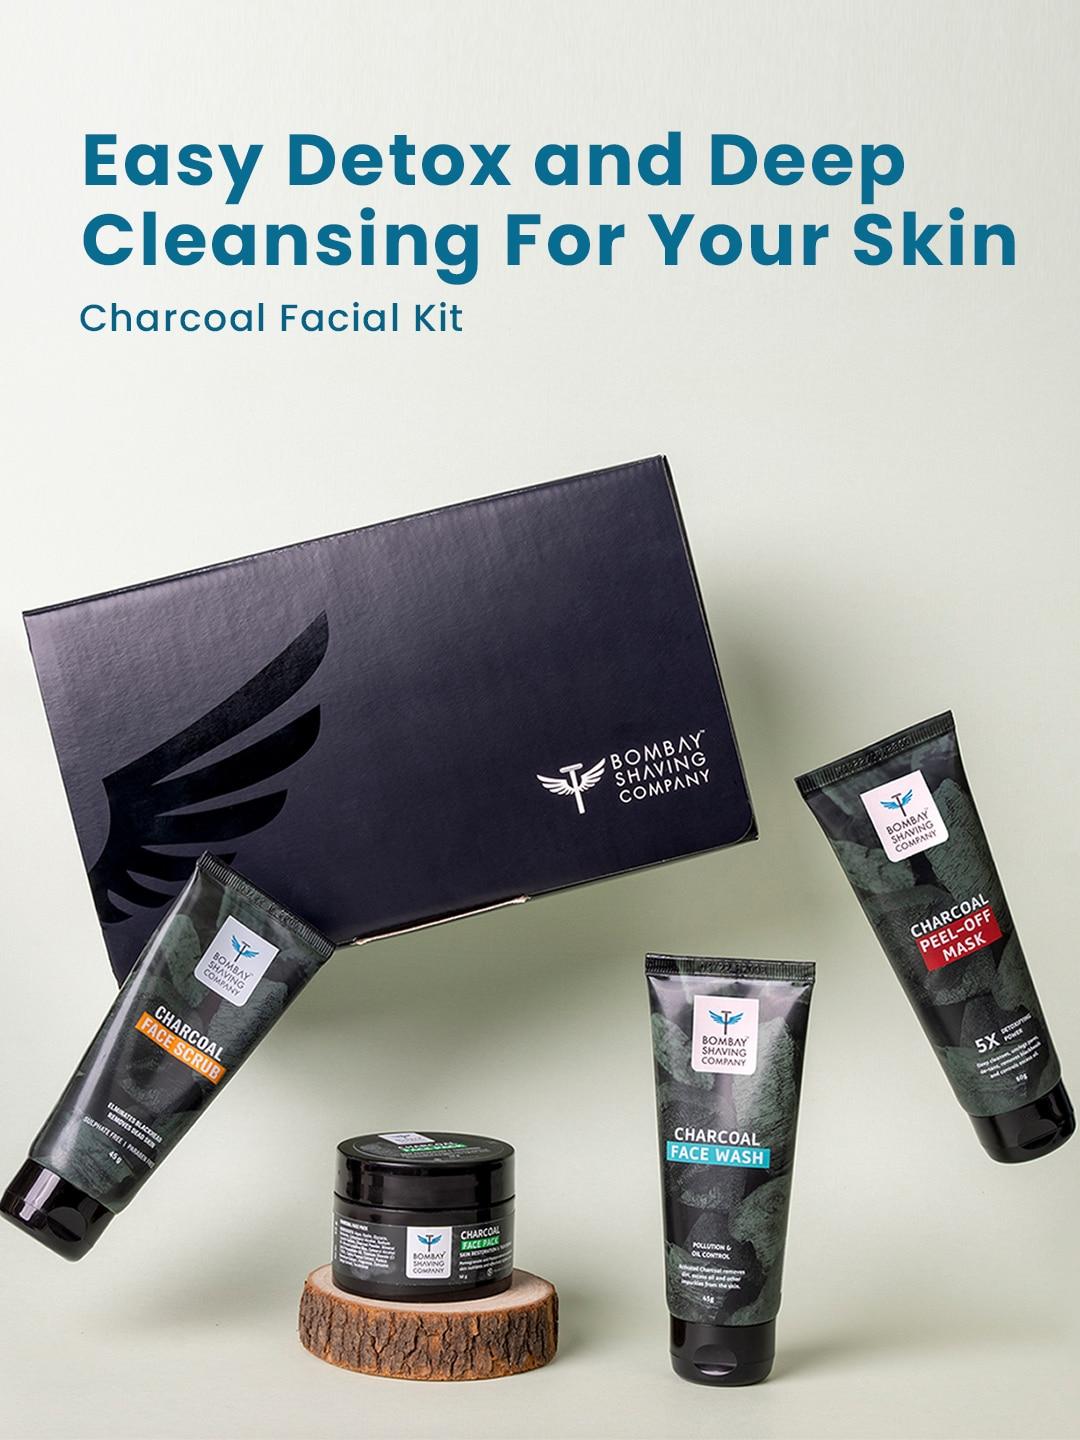 Bombay Shaving Company Activated Charcoal Grooming Gift Kit for Men